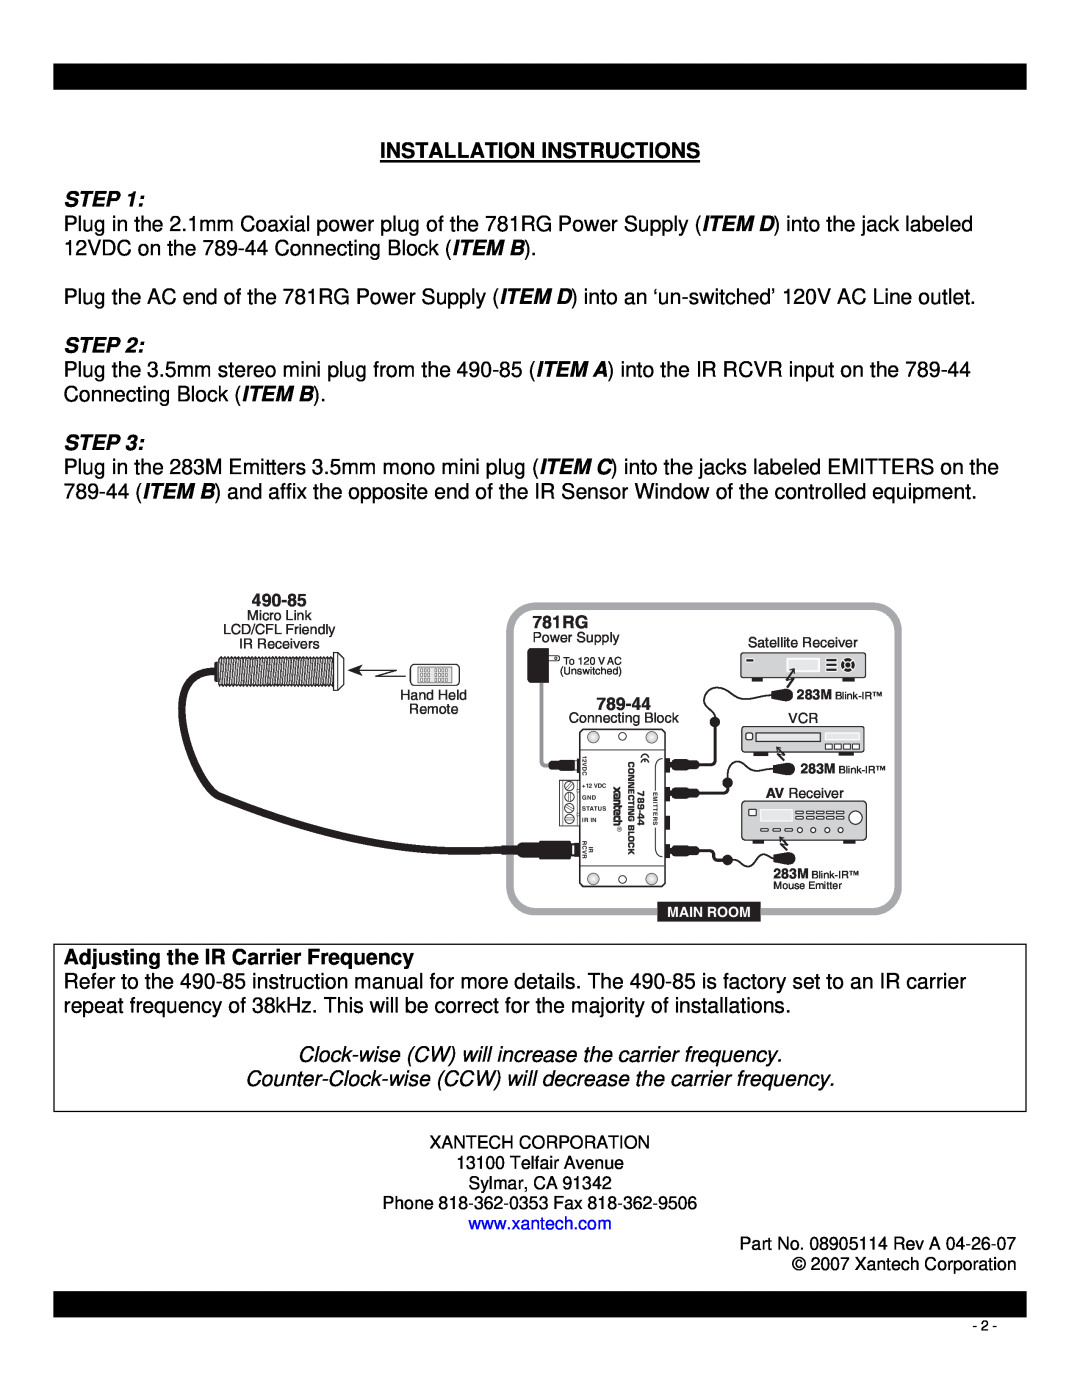 Xantech 490-85 KITRP manual Installation Instructions, Adjusting the IR Carrier Frequency, Step 